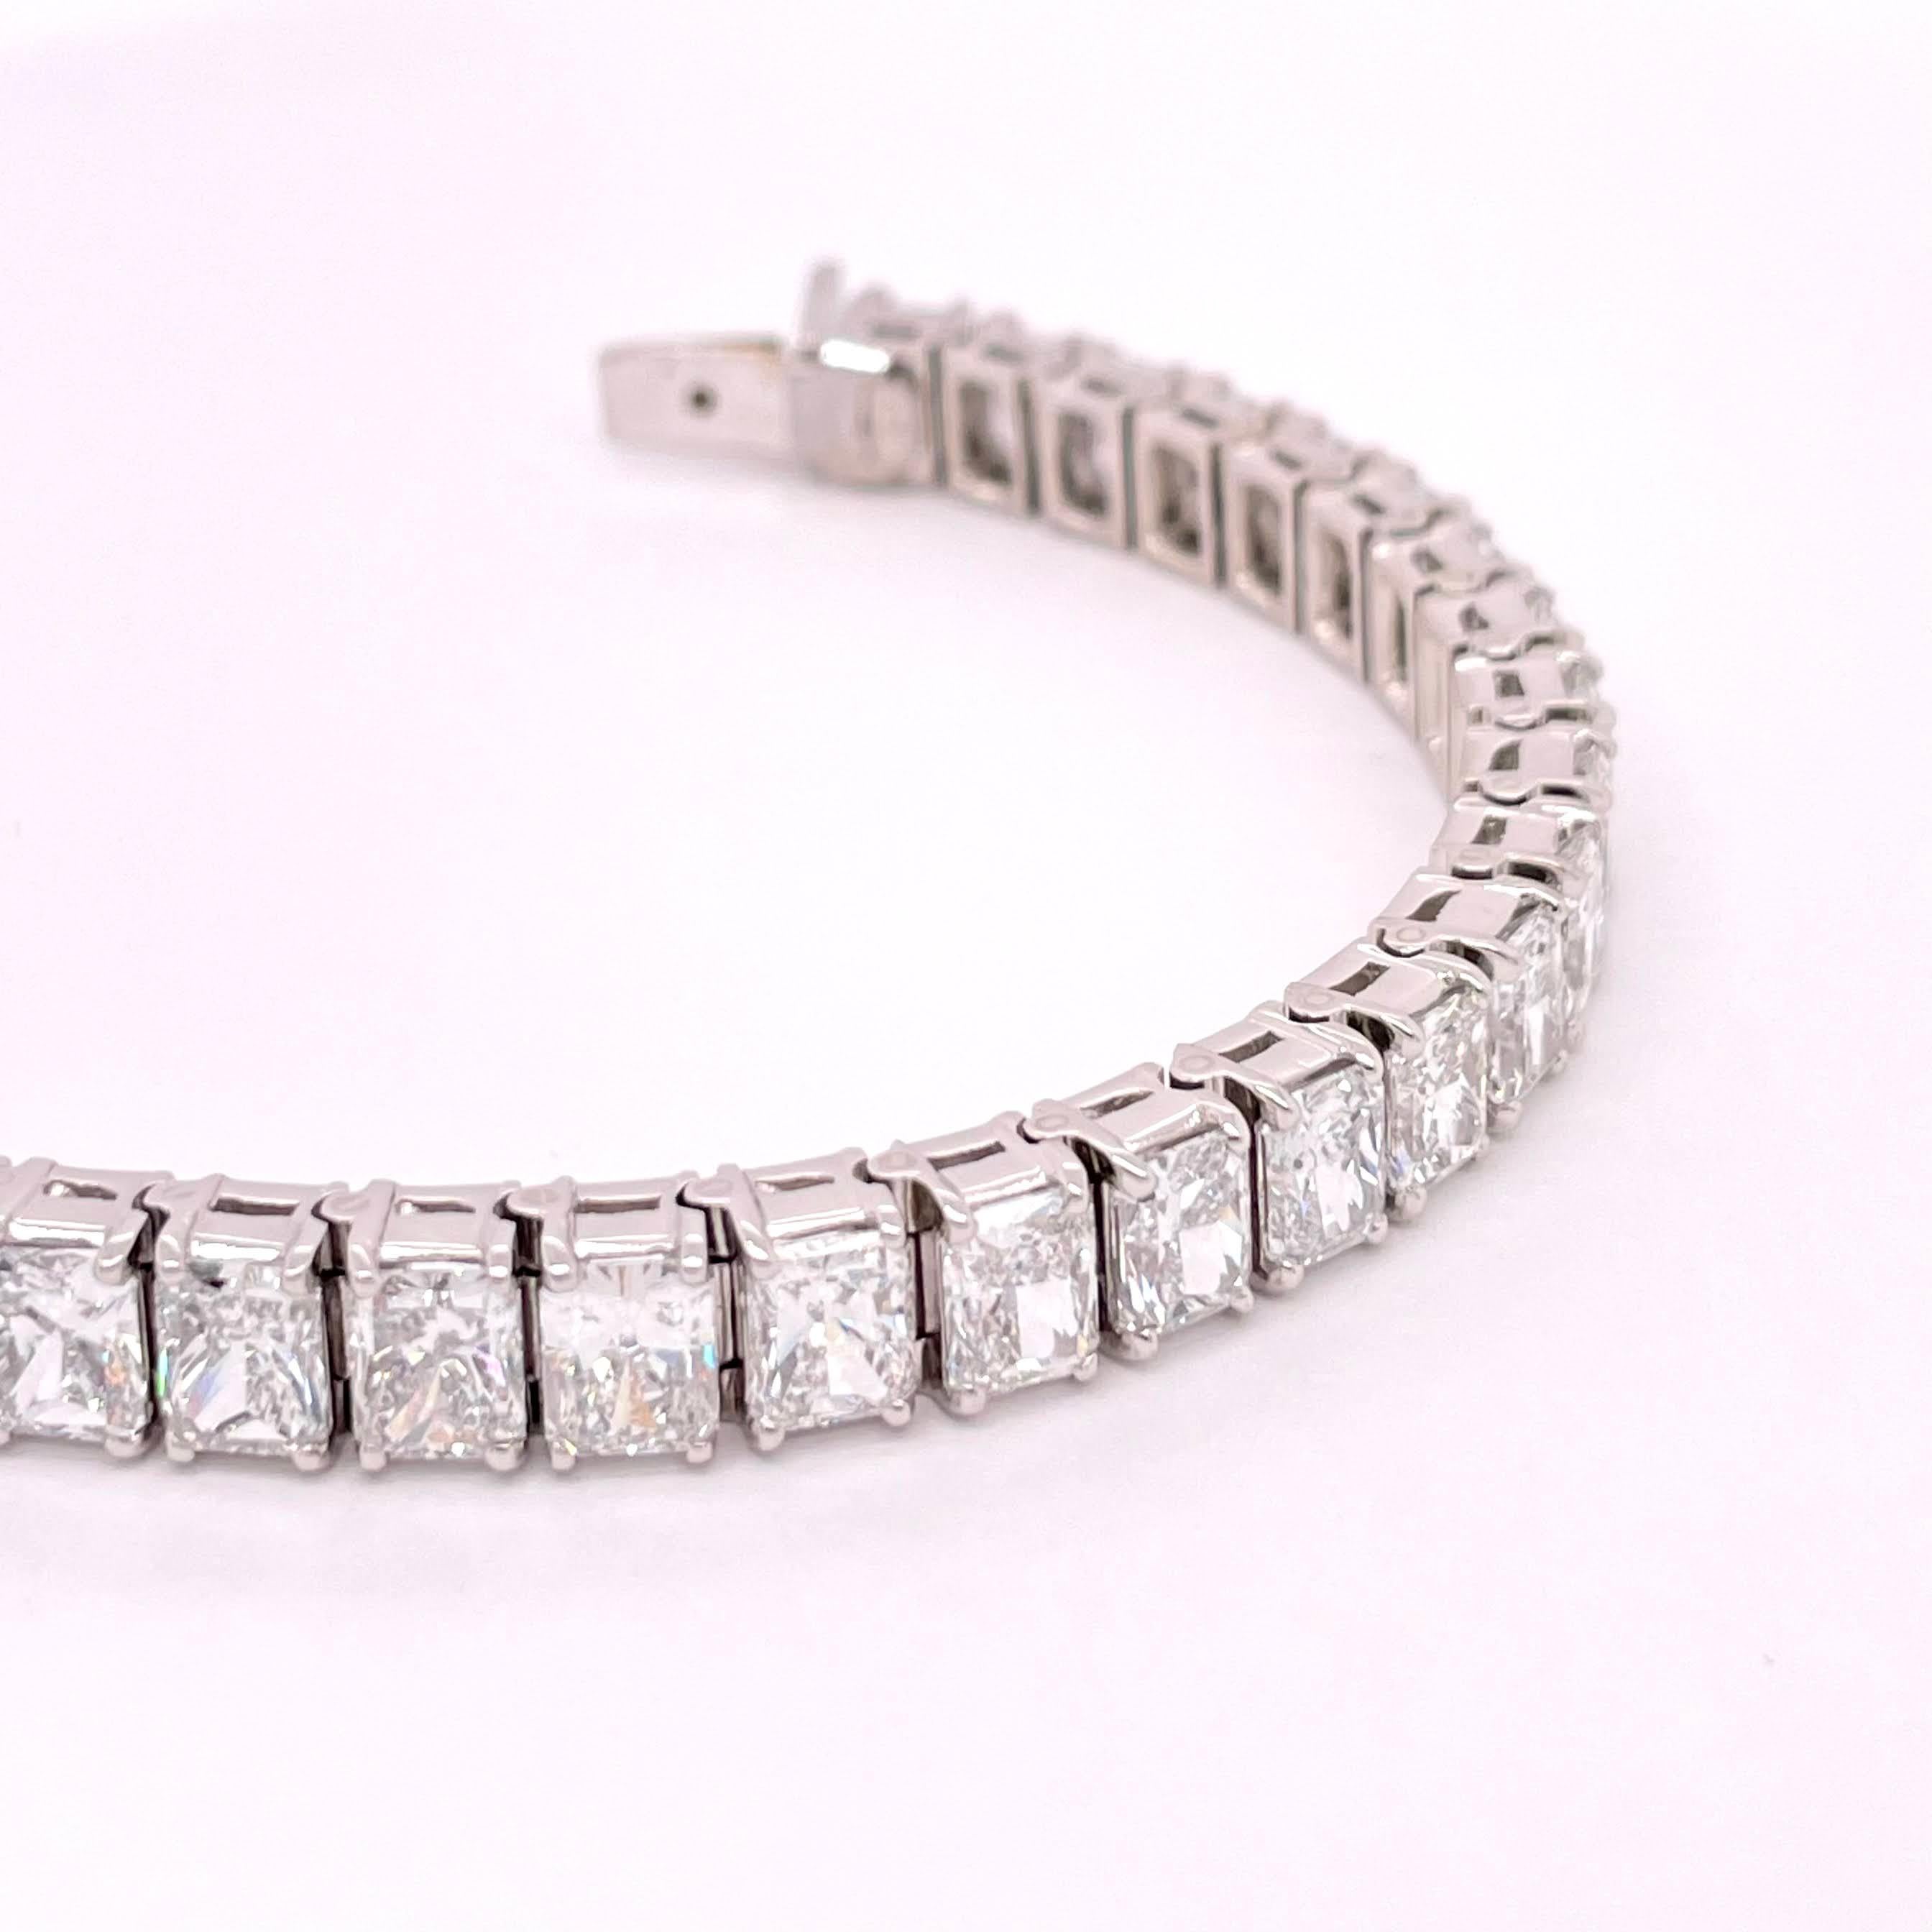 This Beautiful Radiant Tennis Bracelet is made with all GIA Certified Stones which consist of D,E,F color stones VS+ quality.
We custom any tennis bracelet in any size and any length
Price will be adjusted accordingly.
